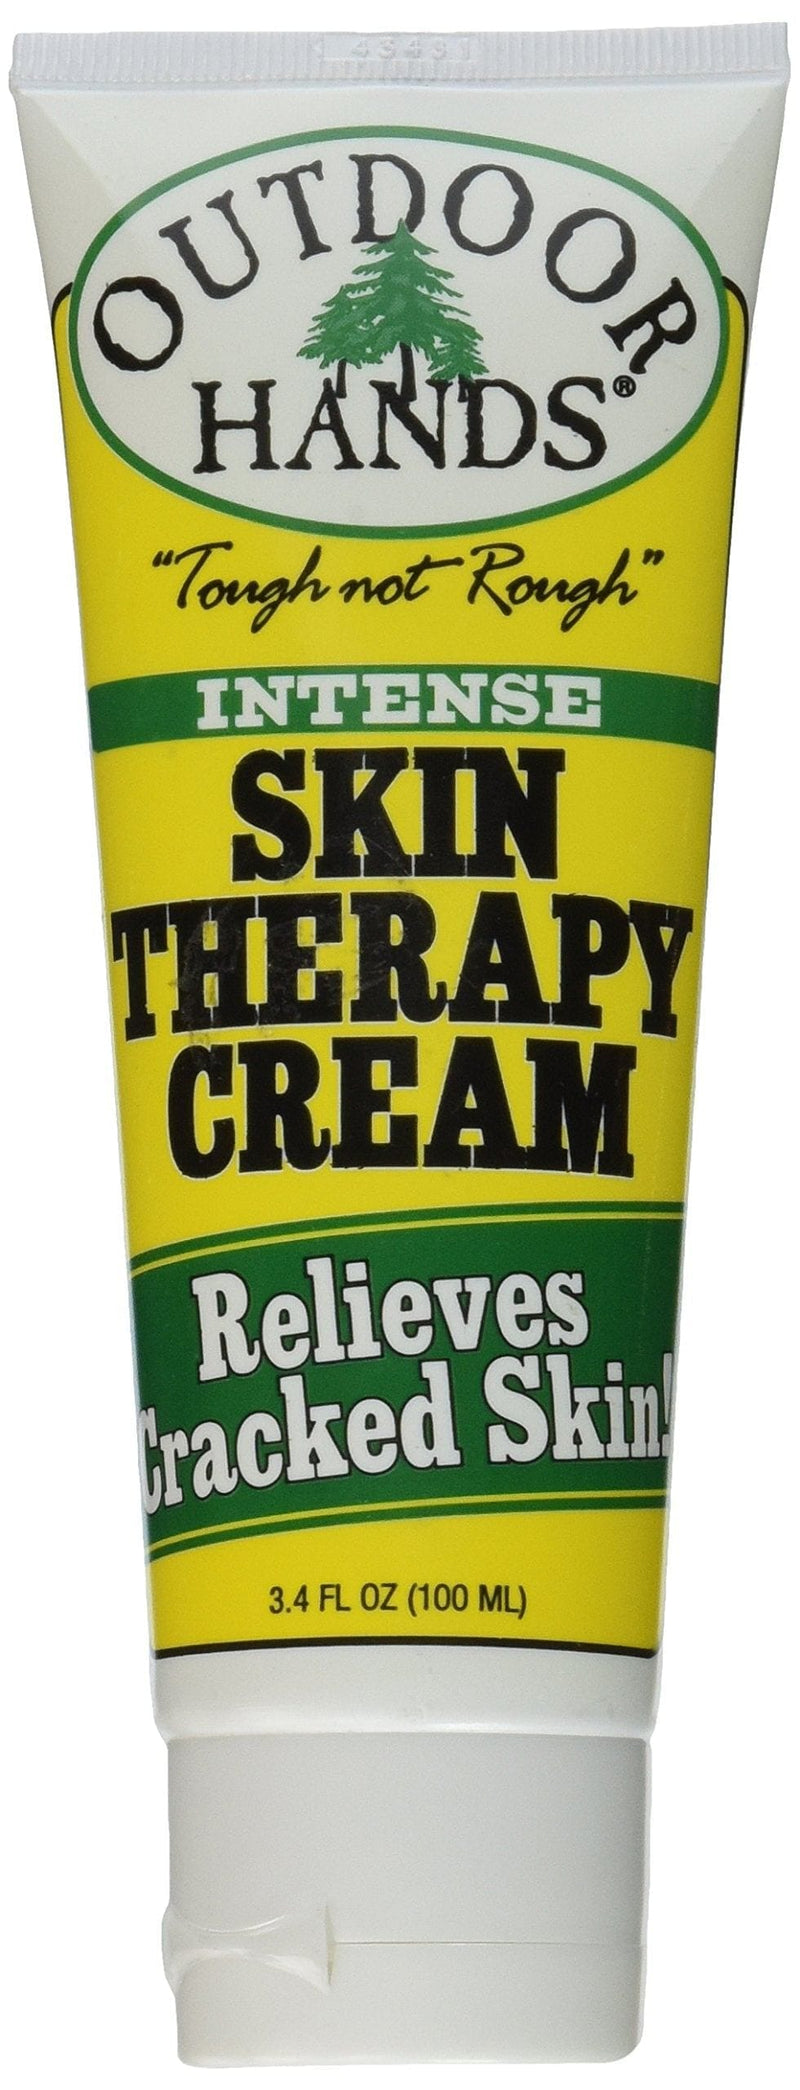 Outdoor Hands Skin Therapy - Shelburne Country Store